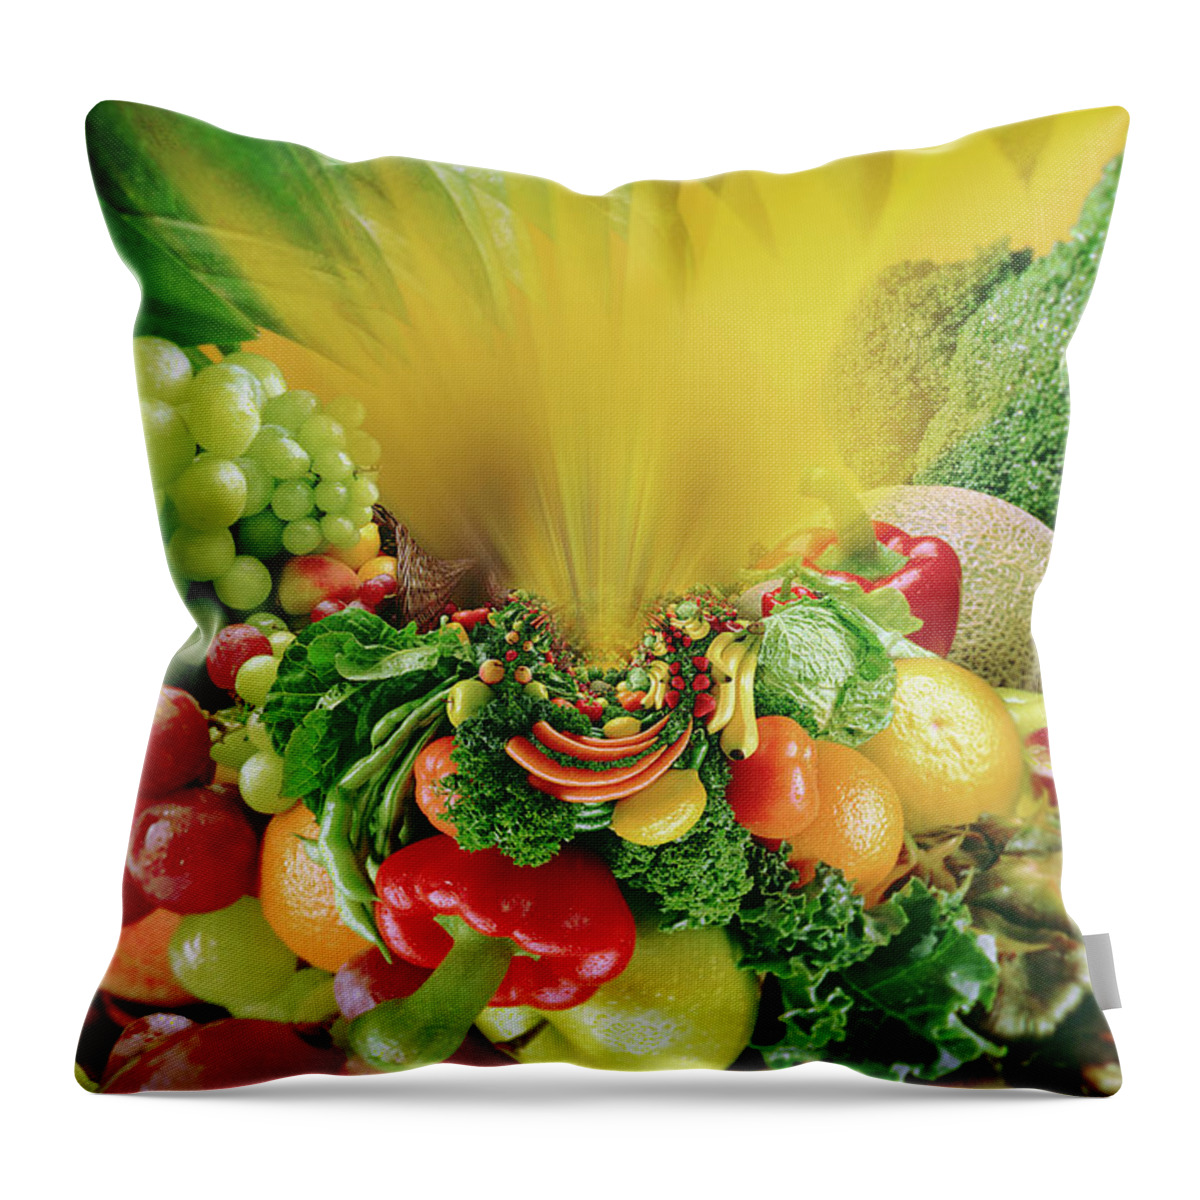 Thanksgiving Celebration. A Cornucopia Of Fruits And Vegetables. Throw Pillow featuring the photograph Cornucipia by Dolores Kaufman